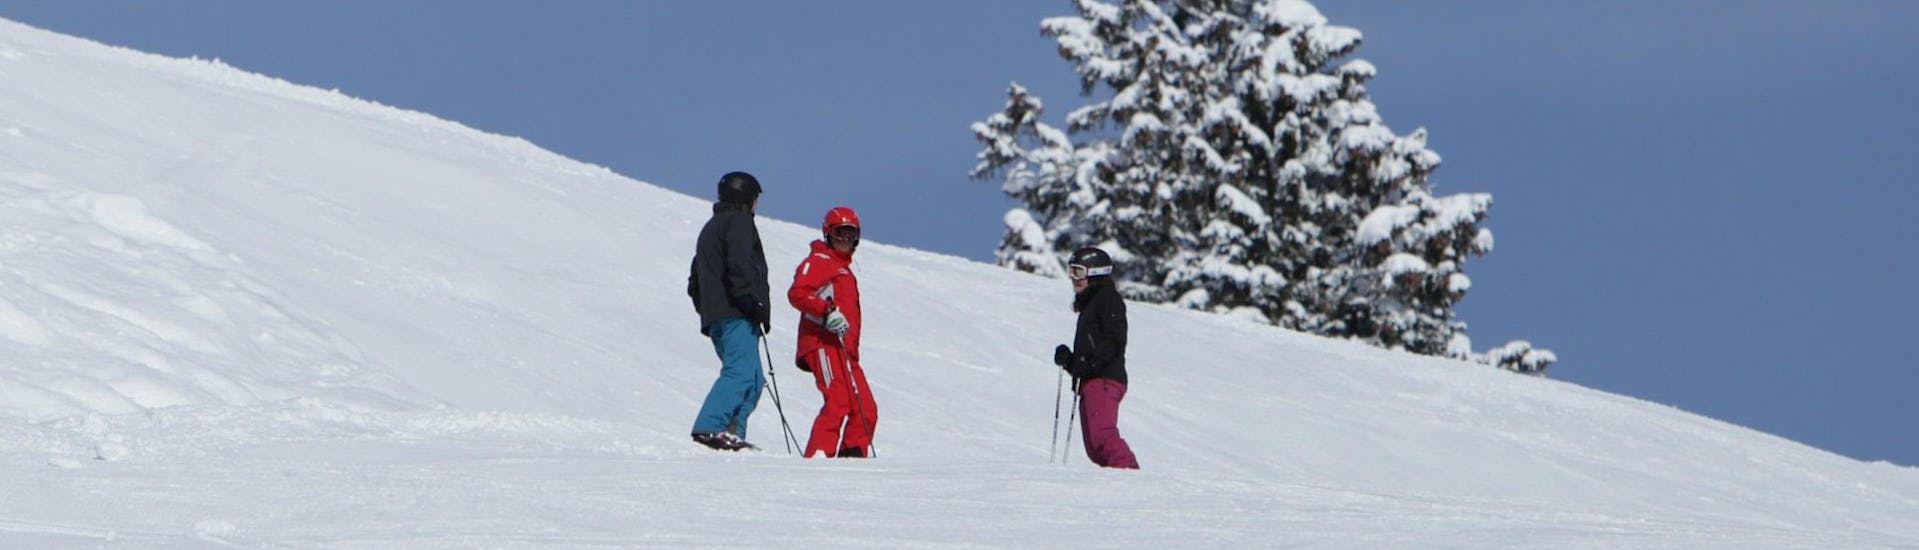 Instructors and skiers on the slopes during Adult Ski Lessons for Beginners with ski school Mittelberg. 